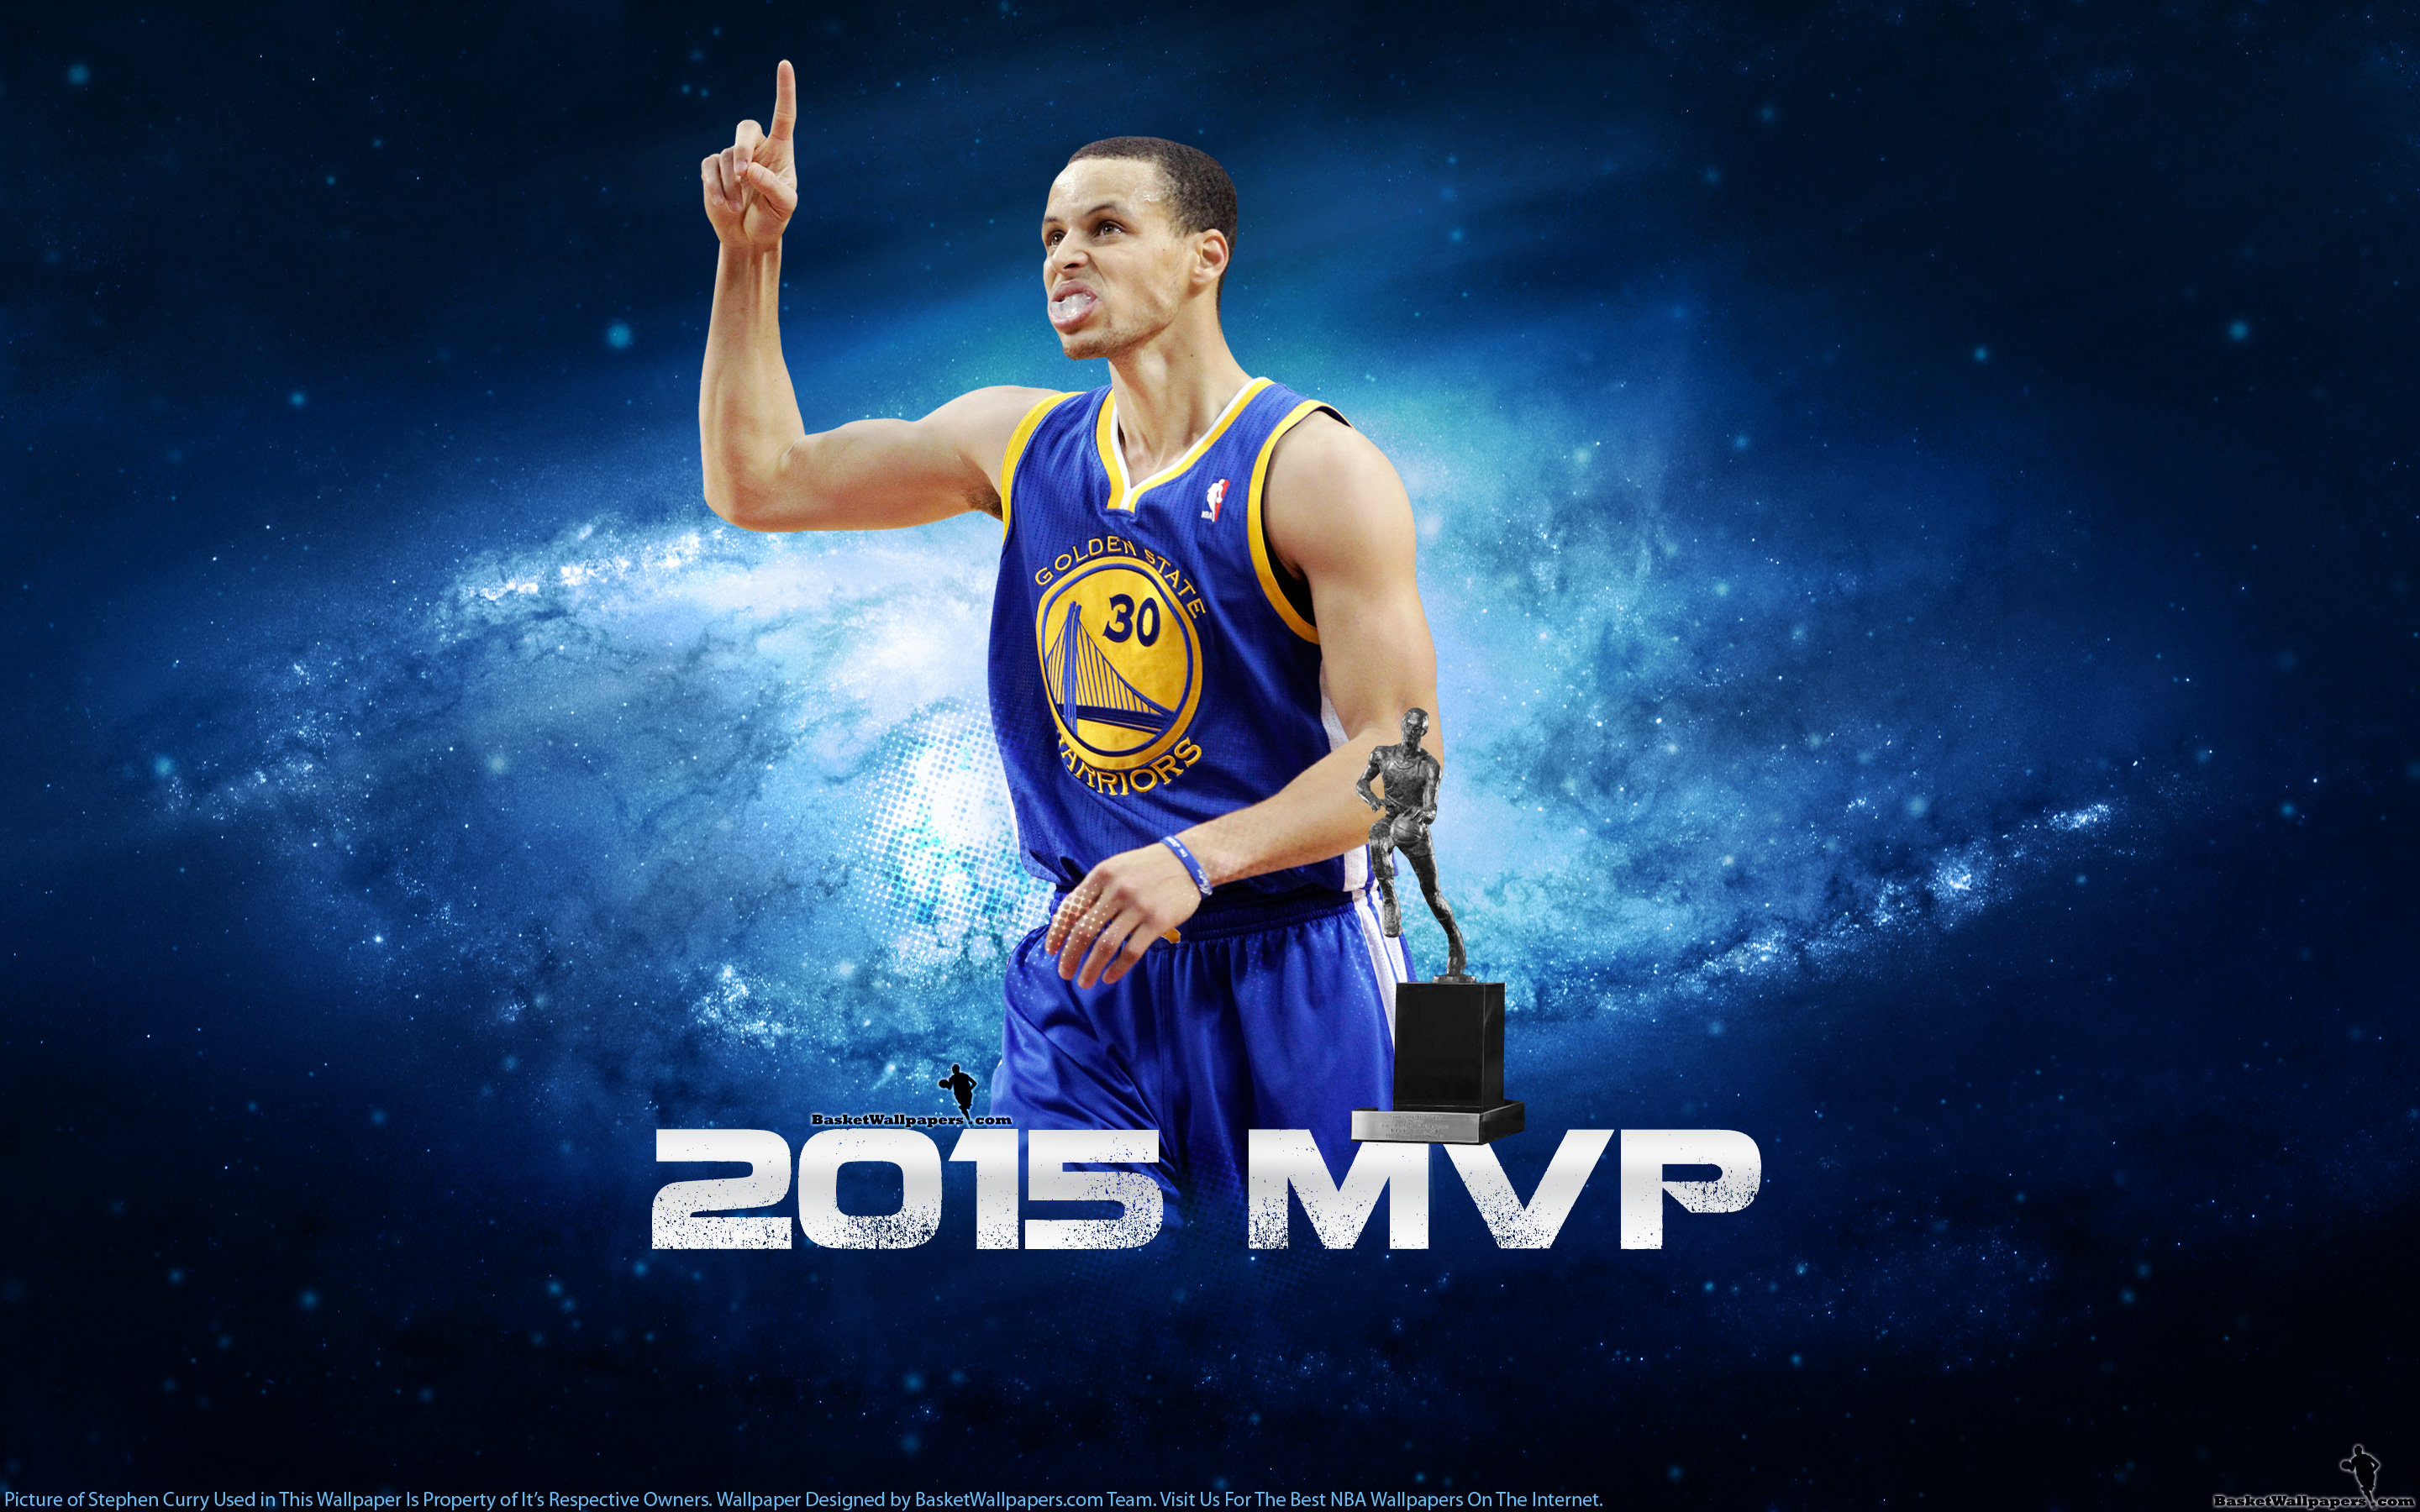 steph curry live wallpapers,basketball player,basketball,basketball moves,team sport,sports